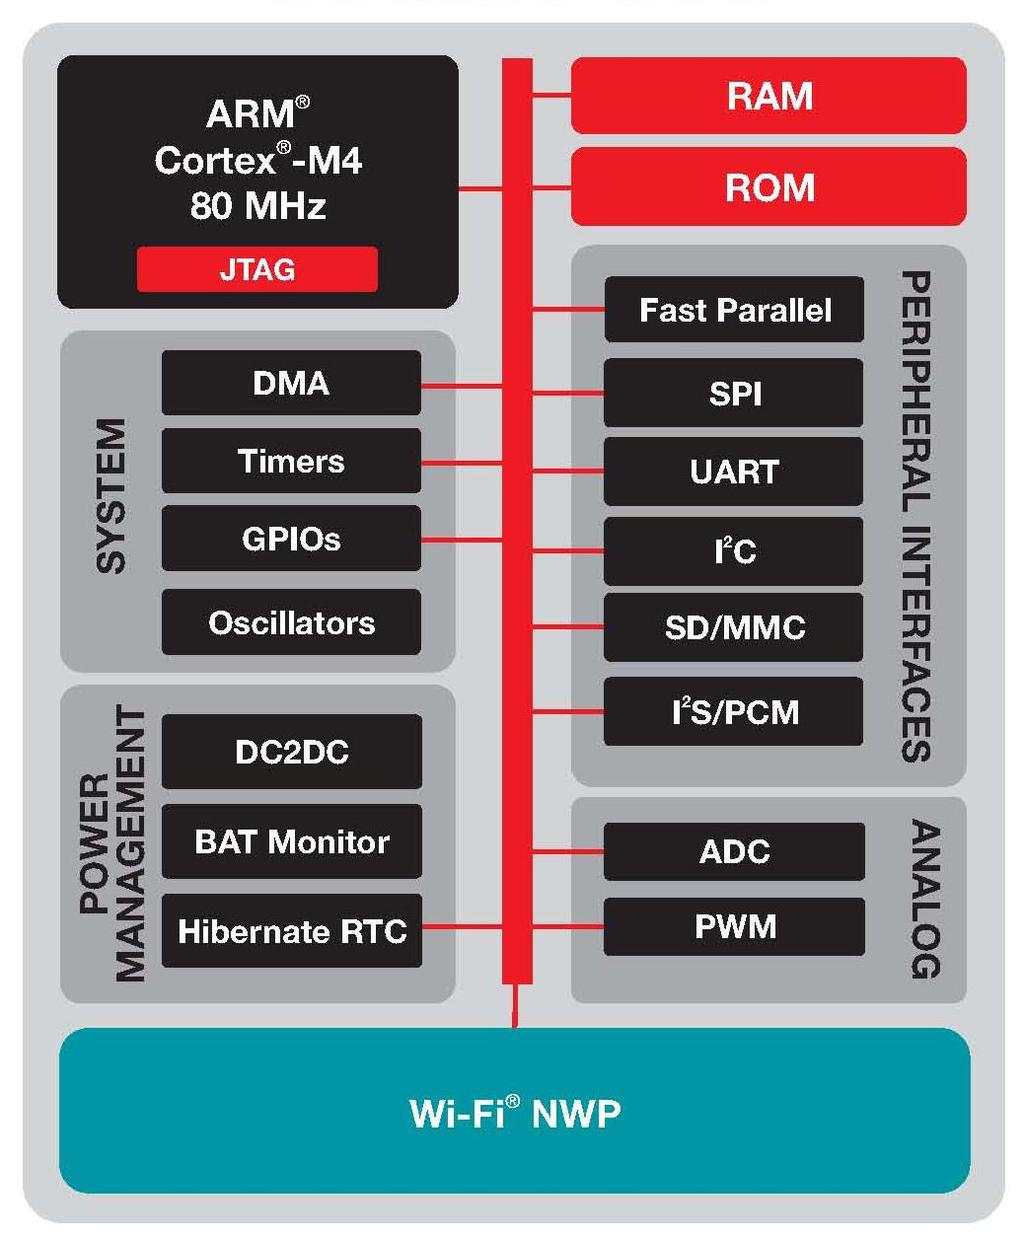 Embedded TCP/IP stack for systems using external low-cost MCU CC3200 Internet on